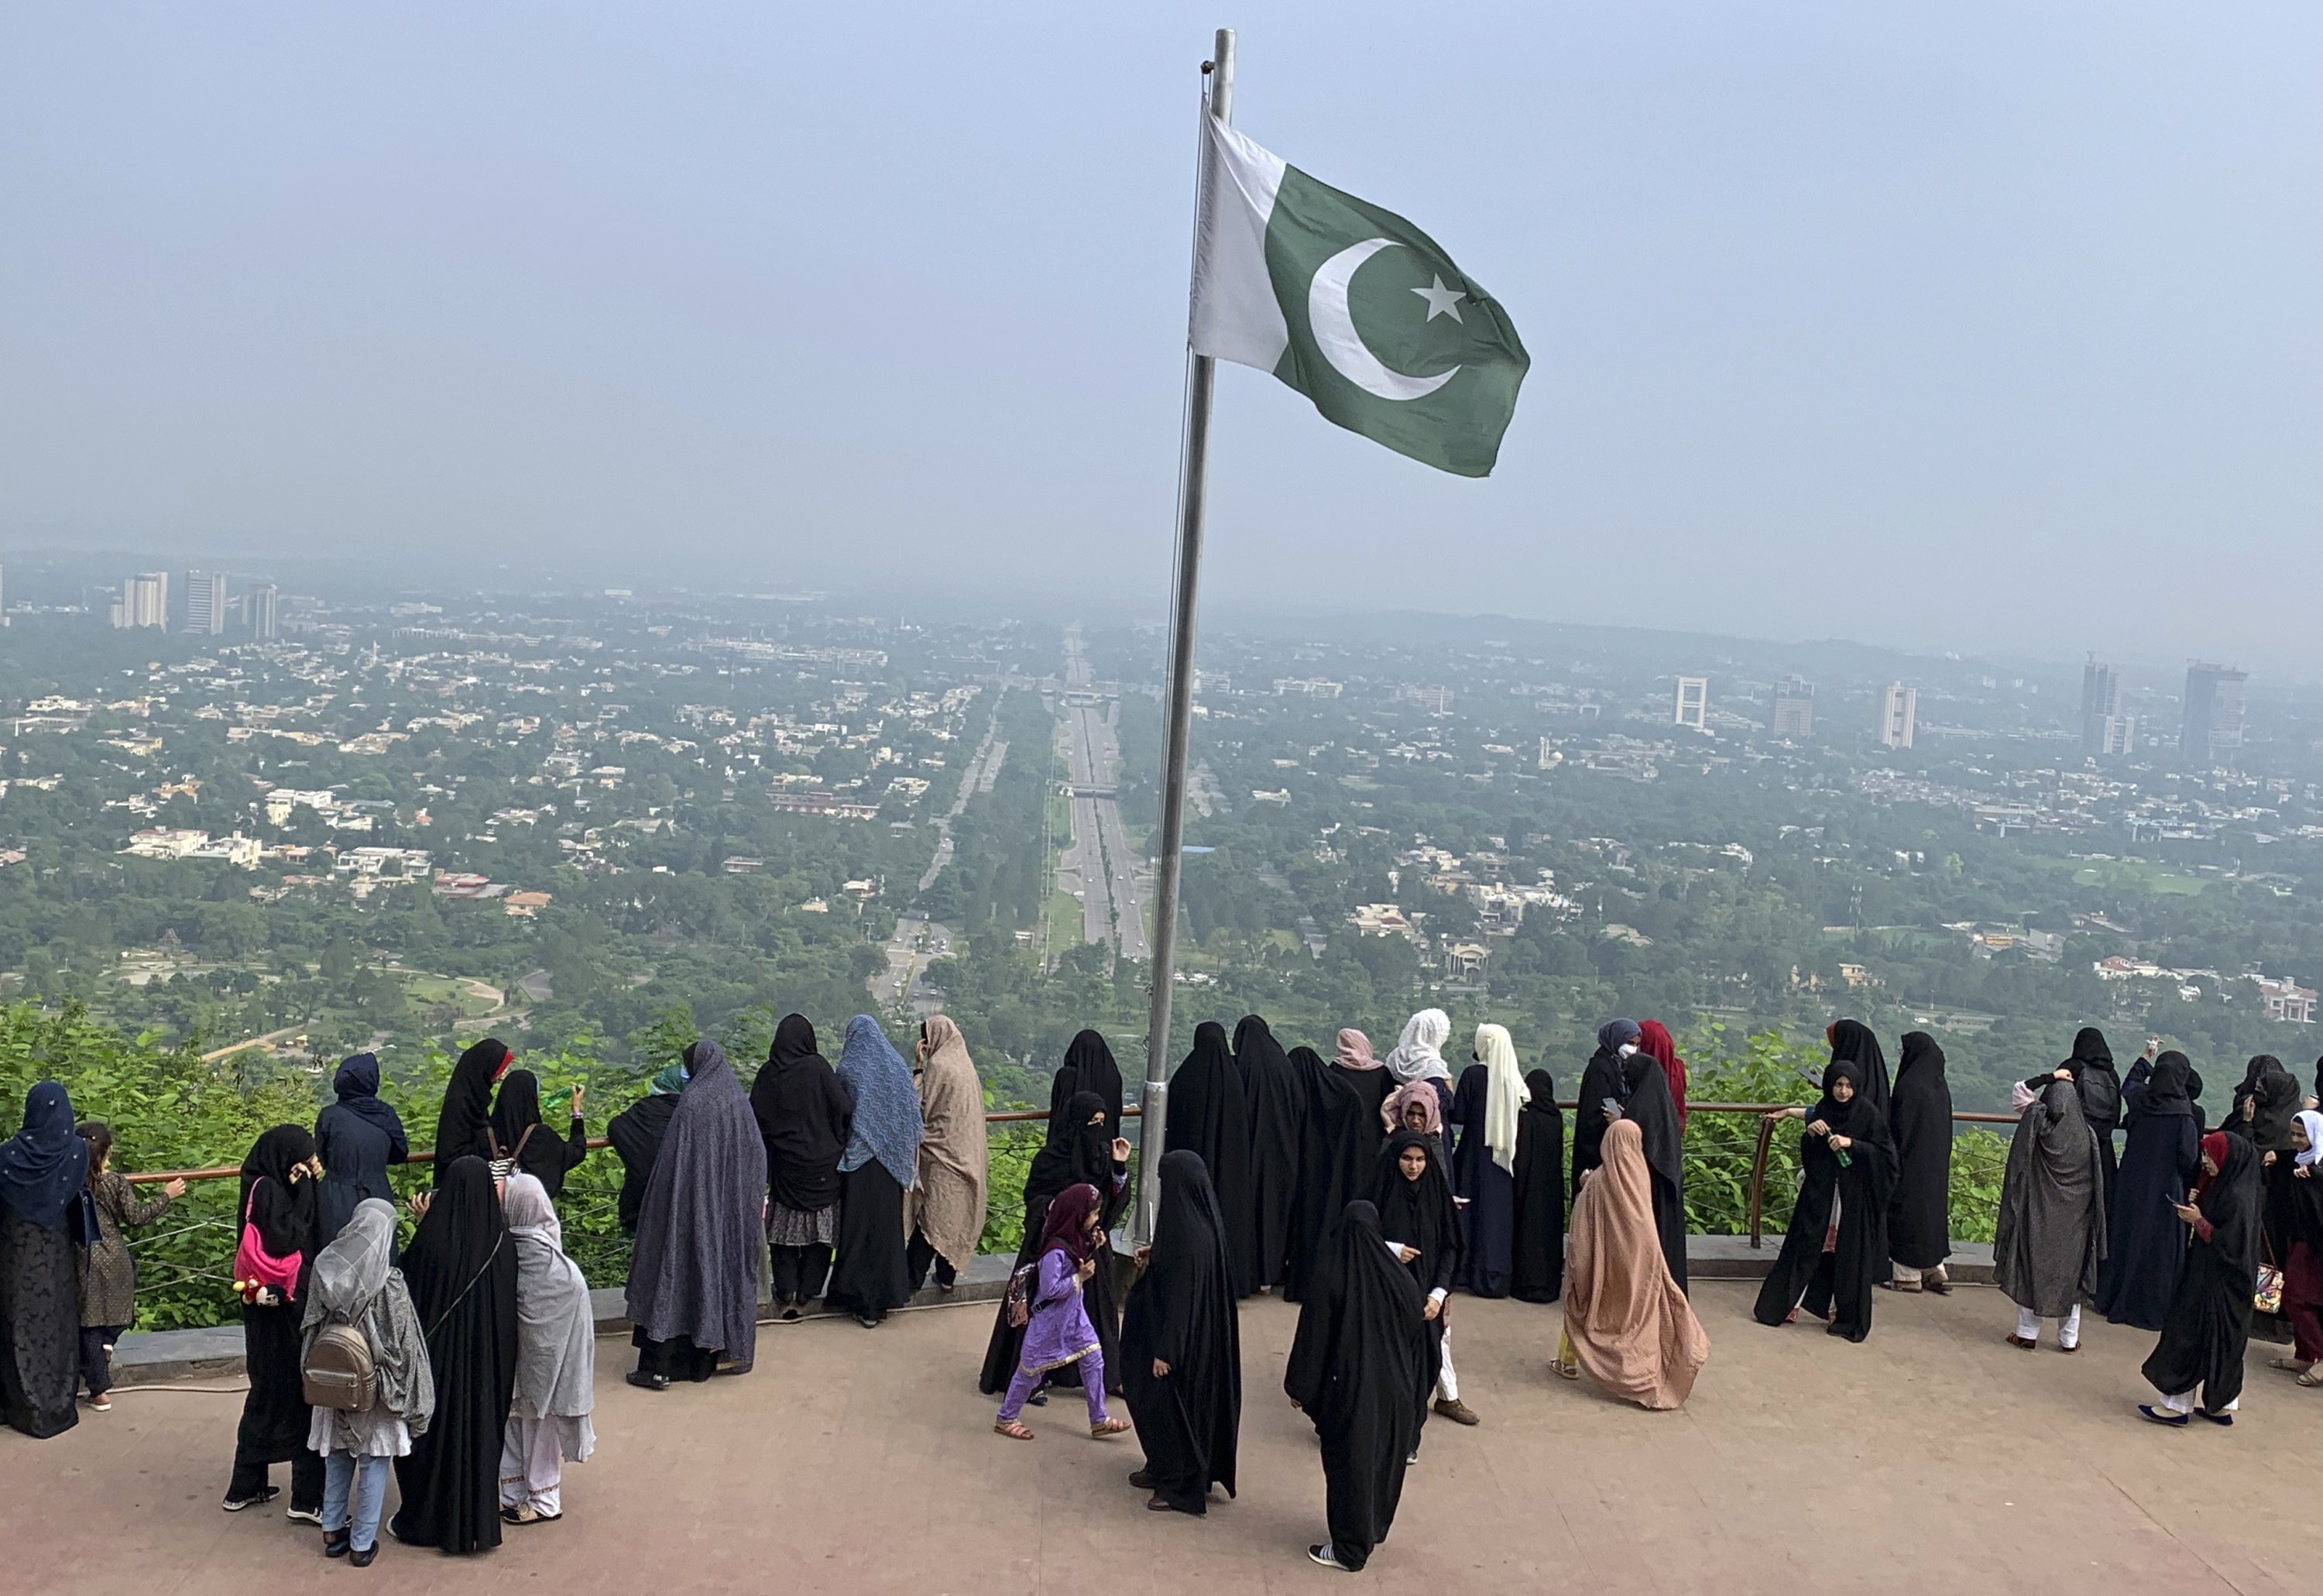 A Pakistani flag flies on a lookout as women take in the view of Islamabad, Pakistan, July 27, 2022. (AP Photo)